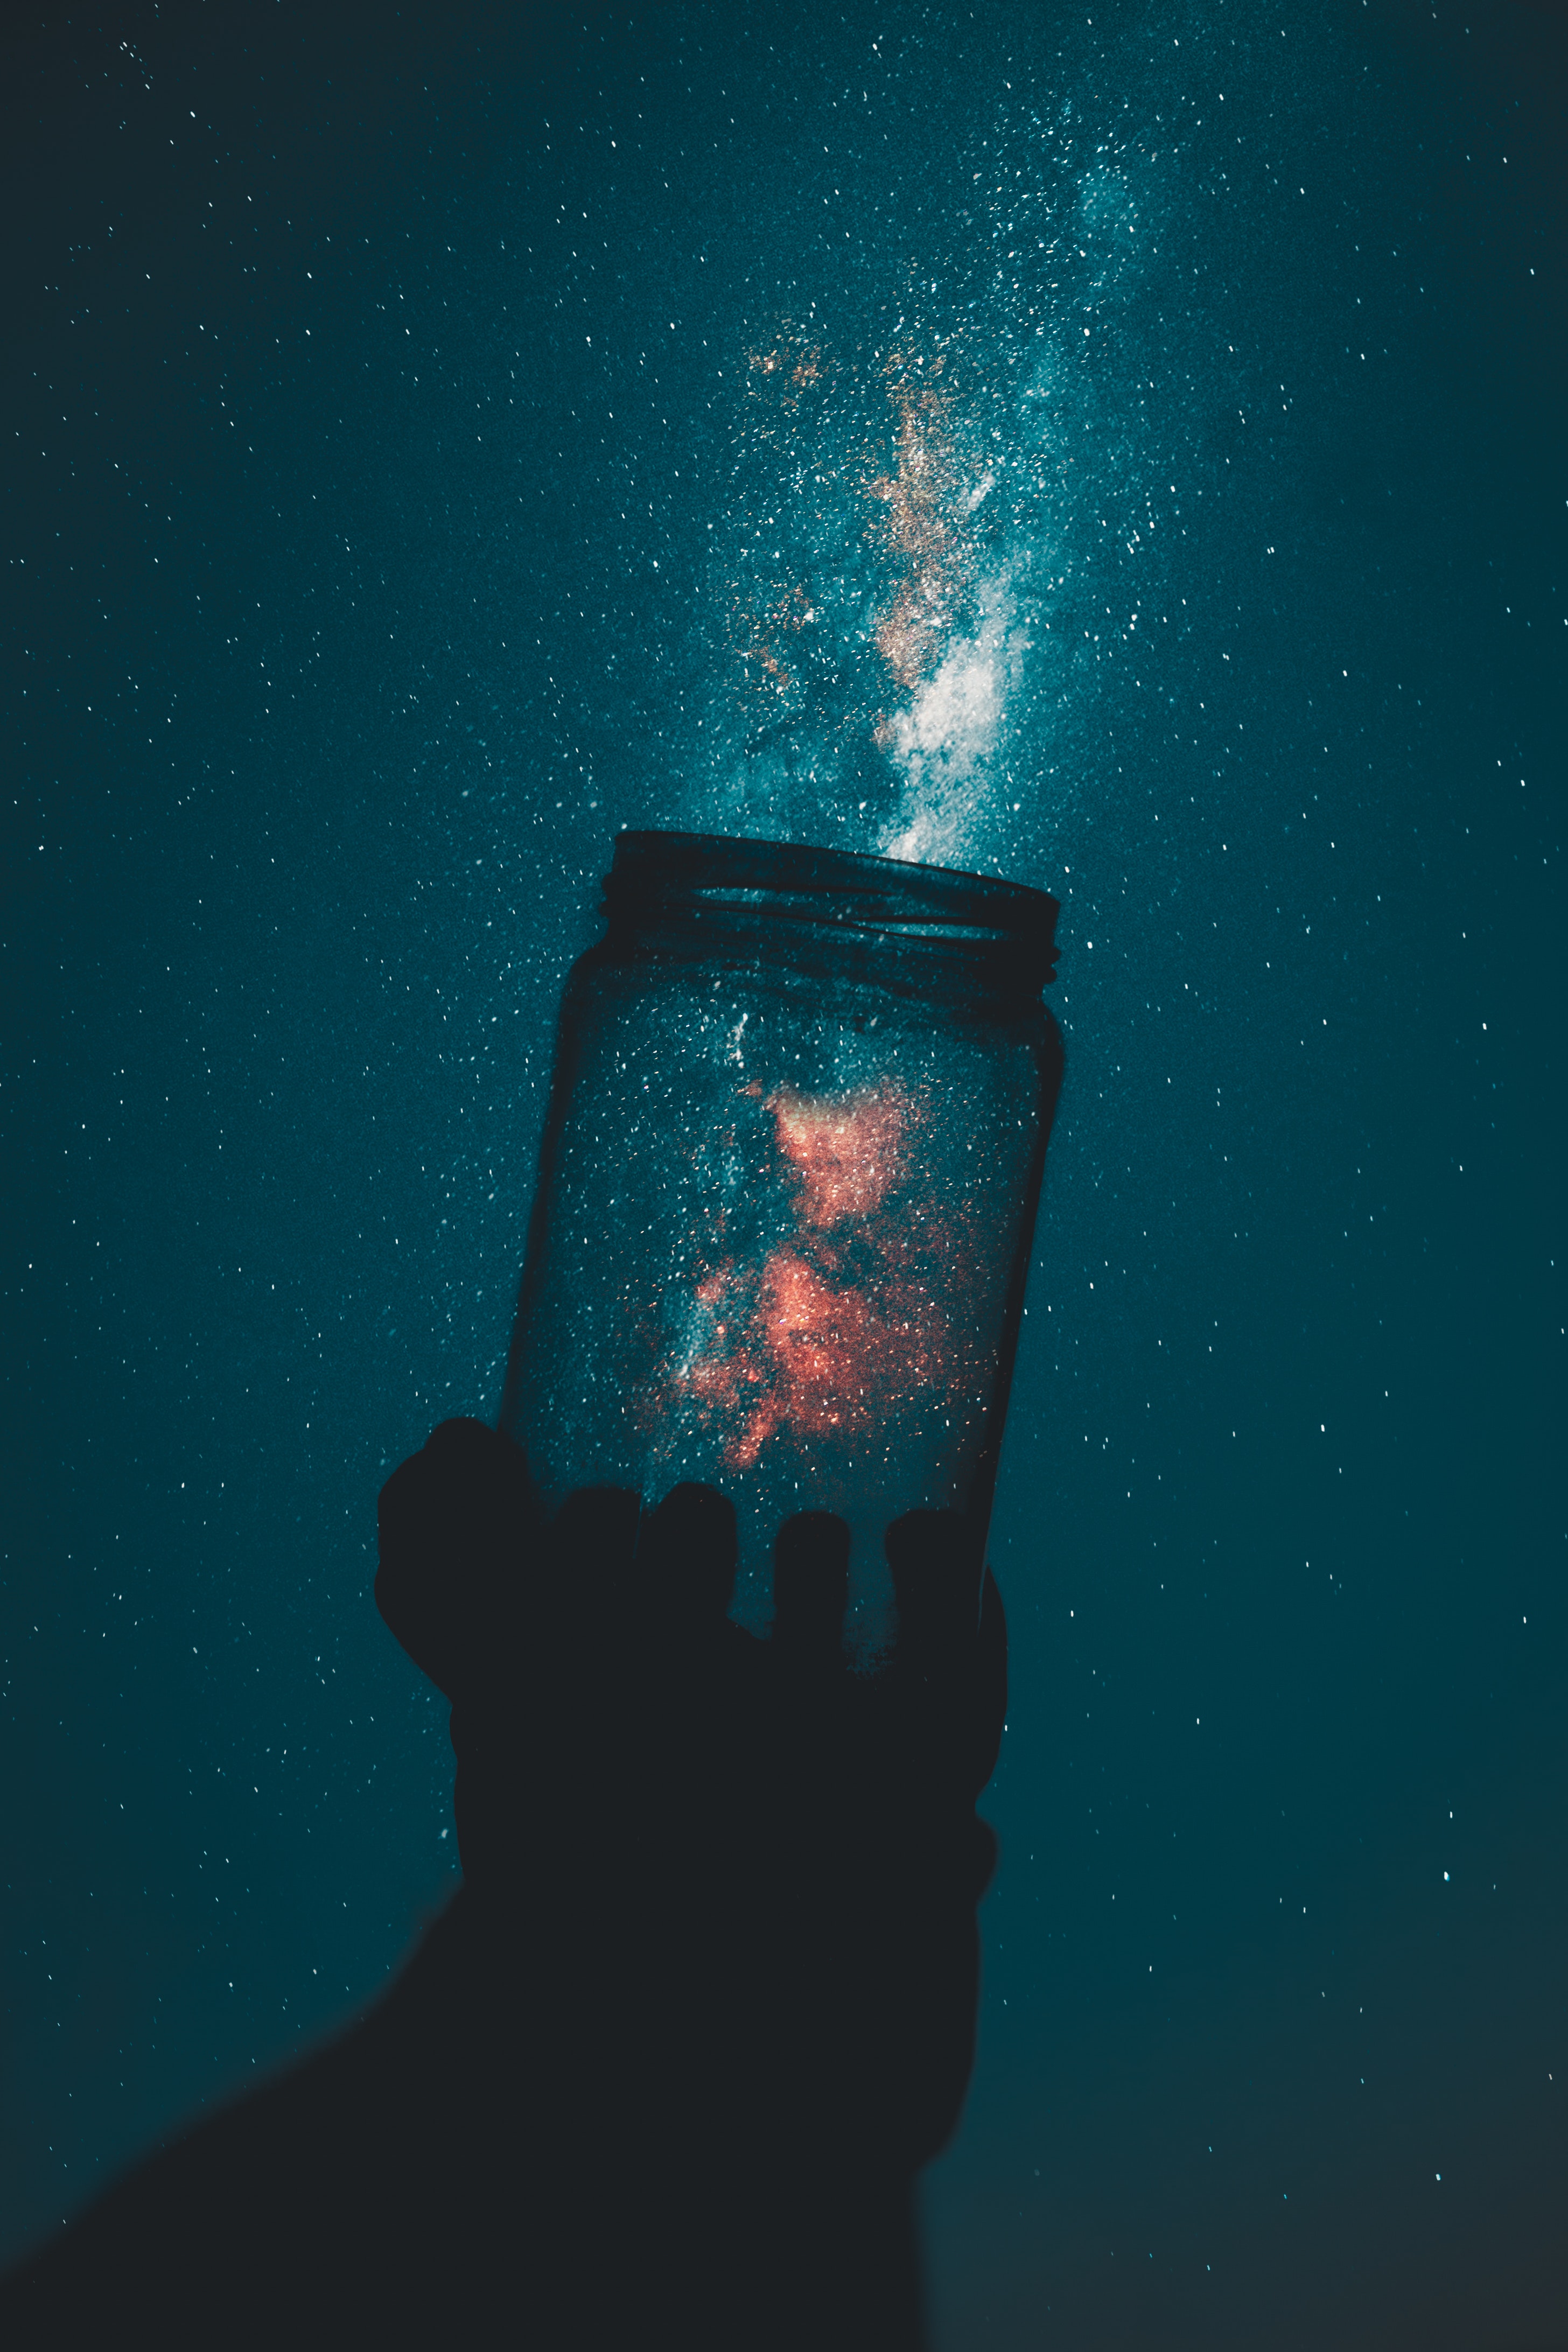 Hand holding a jar over a galaxy image.